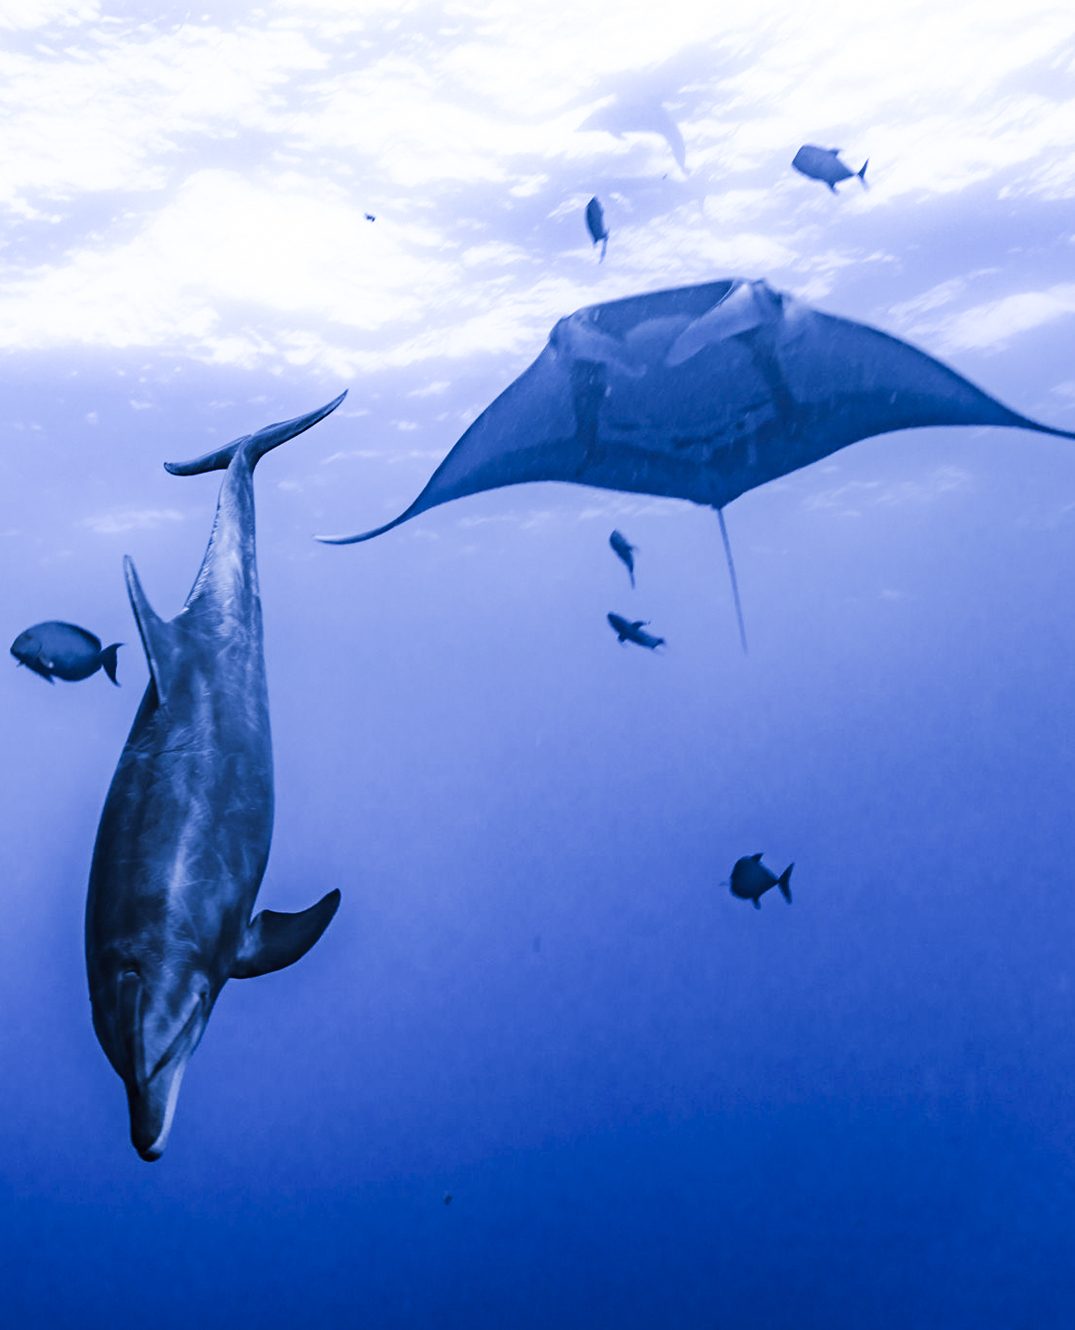 Dolphins and Mantas put on a show at the Boiler. Photo by Divemaster Mirko